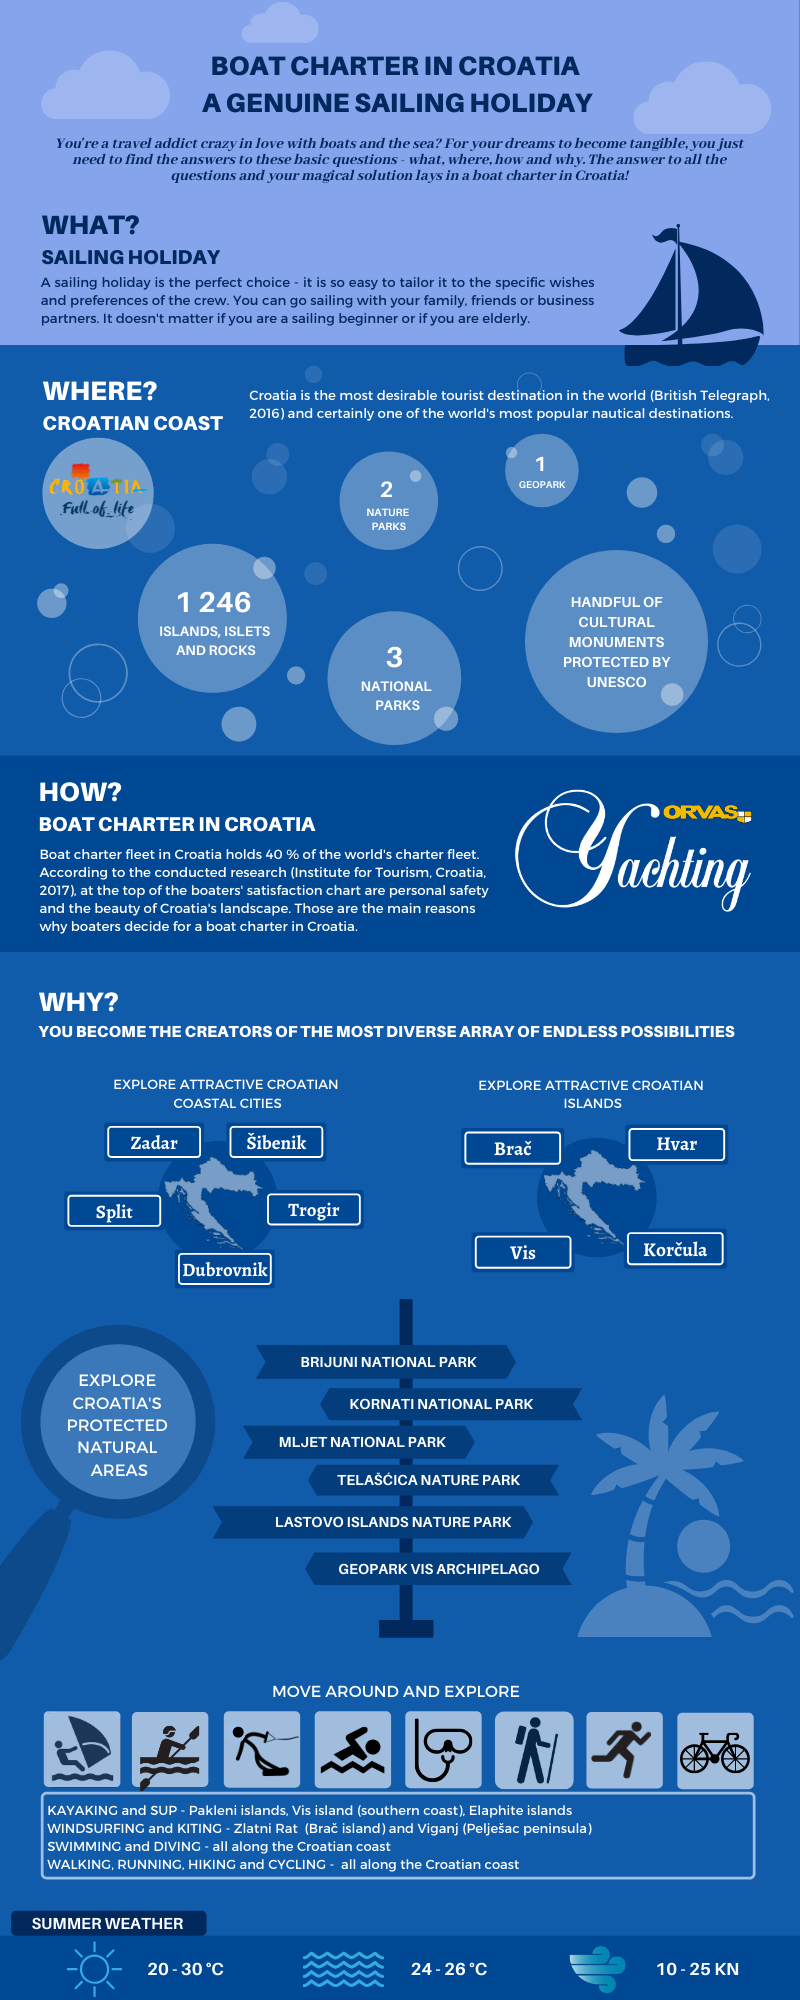 Why Boat Charter In Croatia Is The Genuine Sailing Holiday At Its Best - Infographic